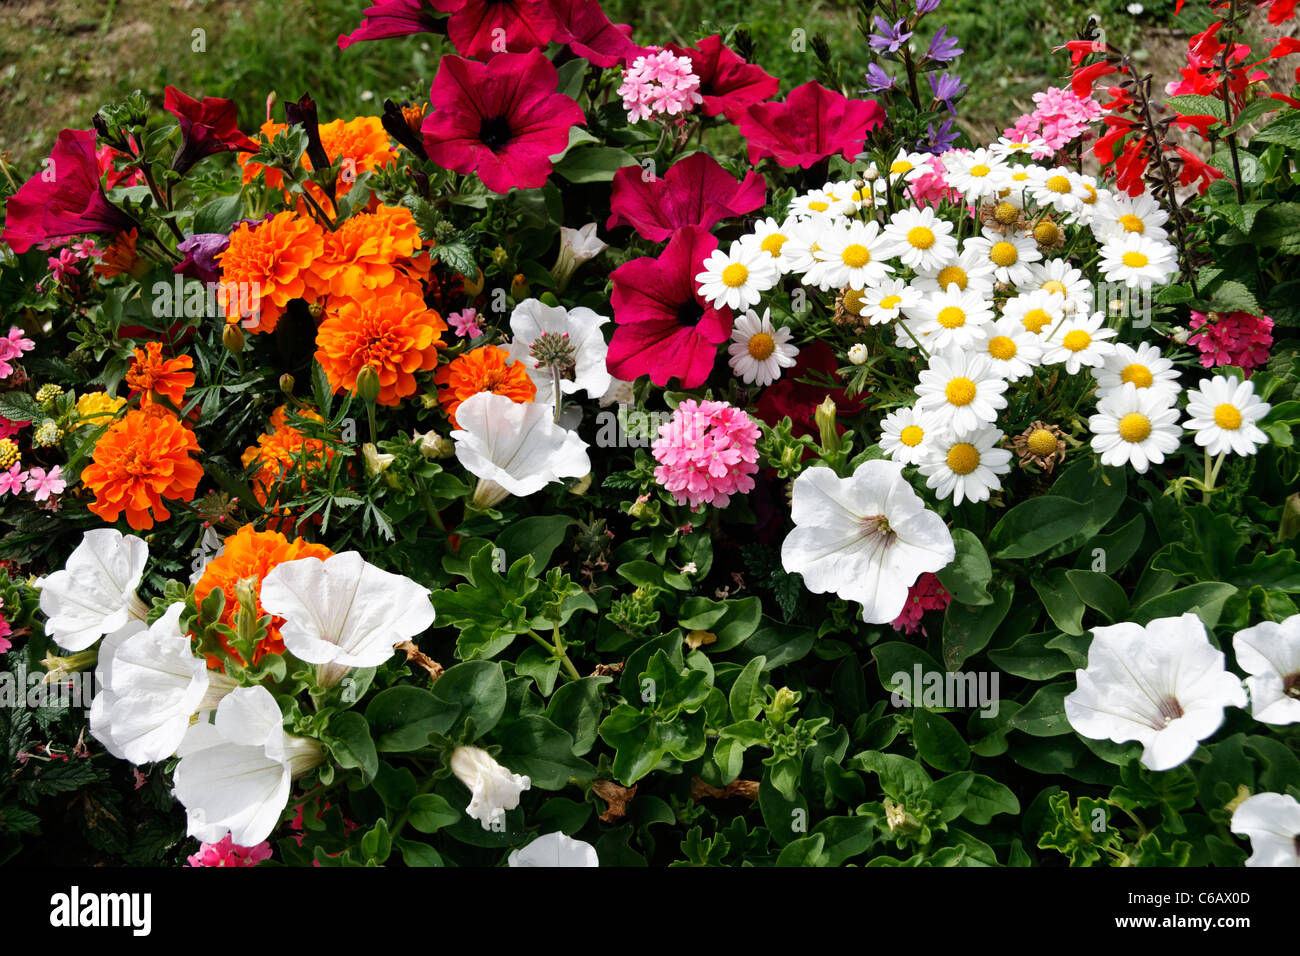 Massive annual flower in a garden : marigold (Tagetes, Carnation of India), petunia,  chrysanthemum. Stock Photo